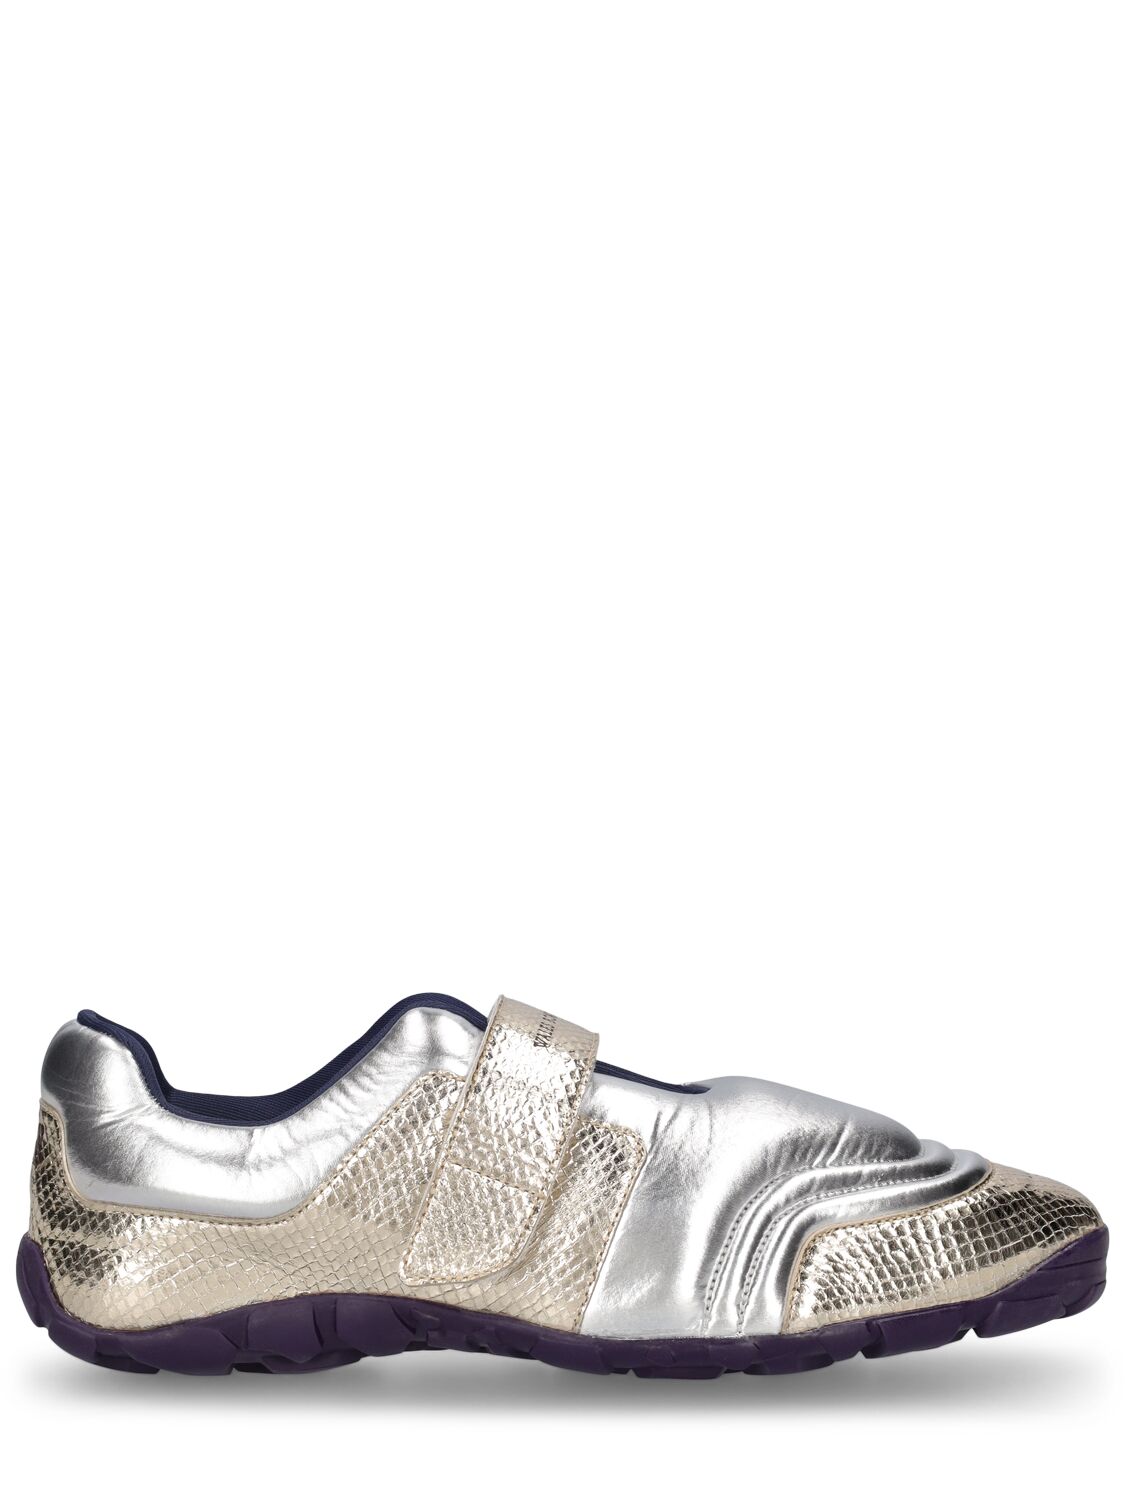 Shop Wales Bonner Printed Croco Metallic Leather Sneakers In Gold